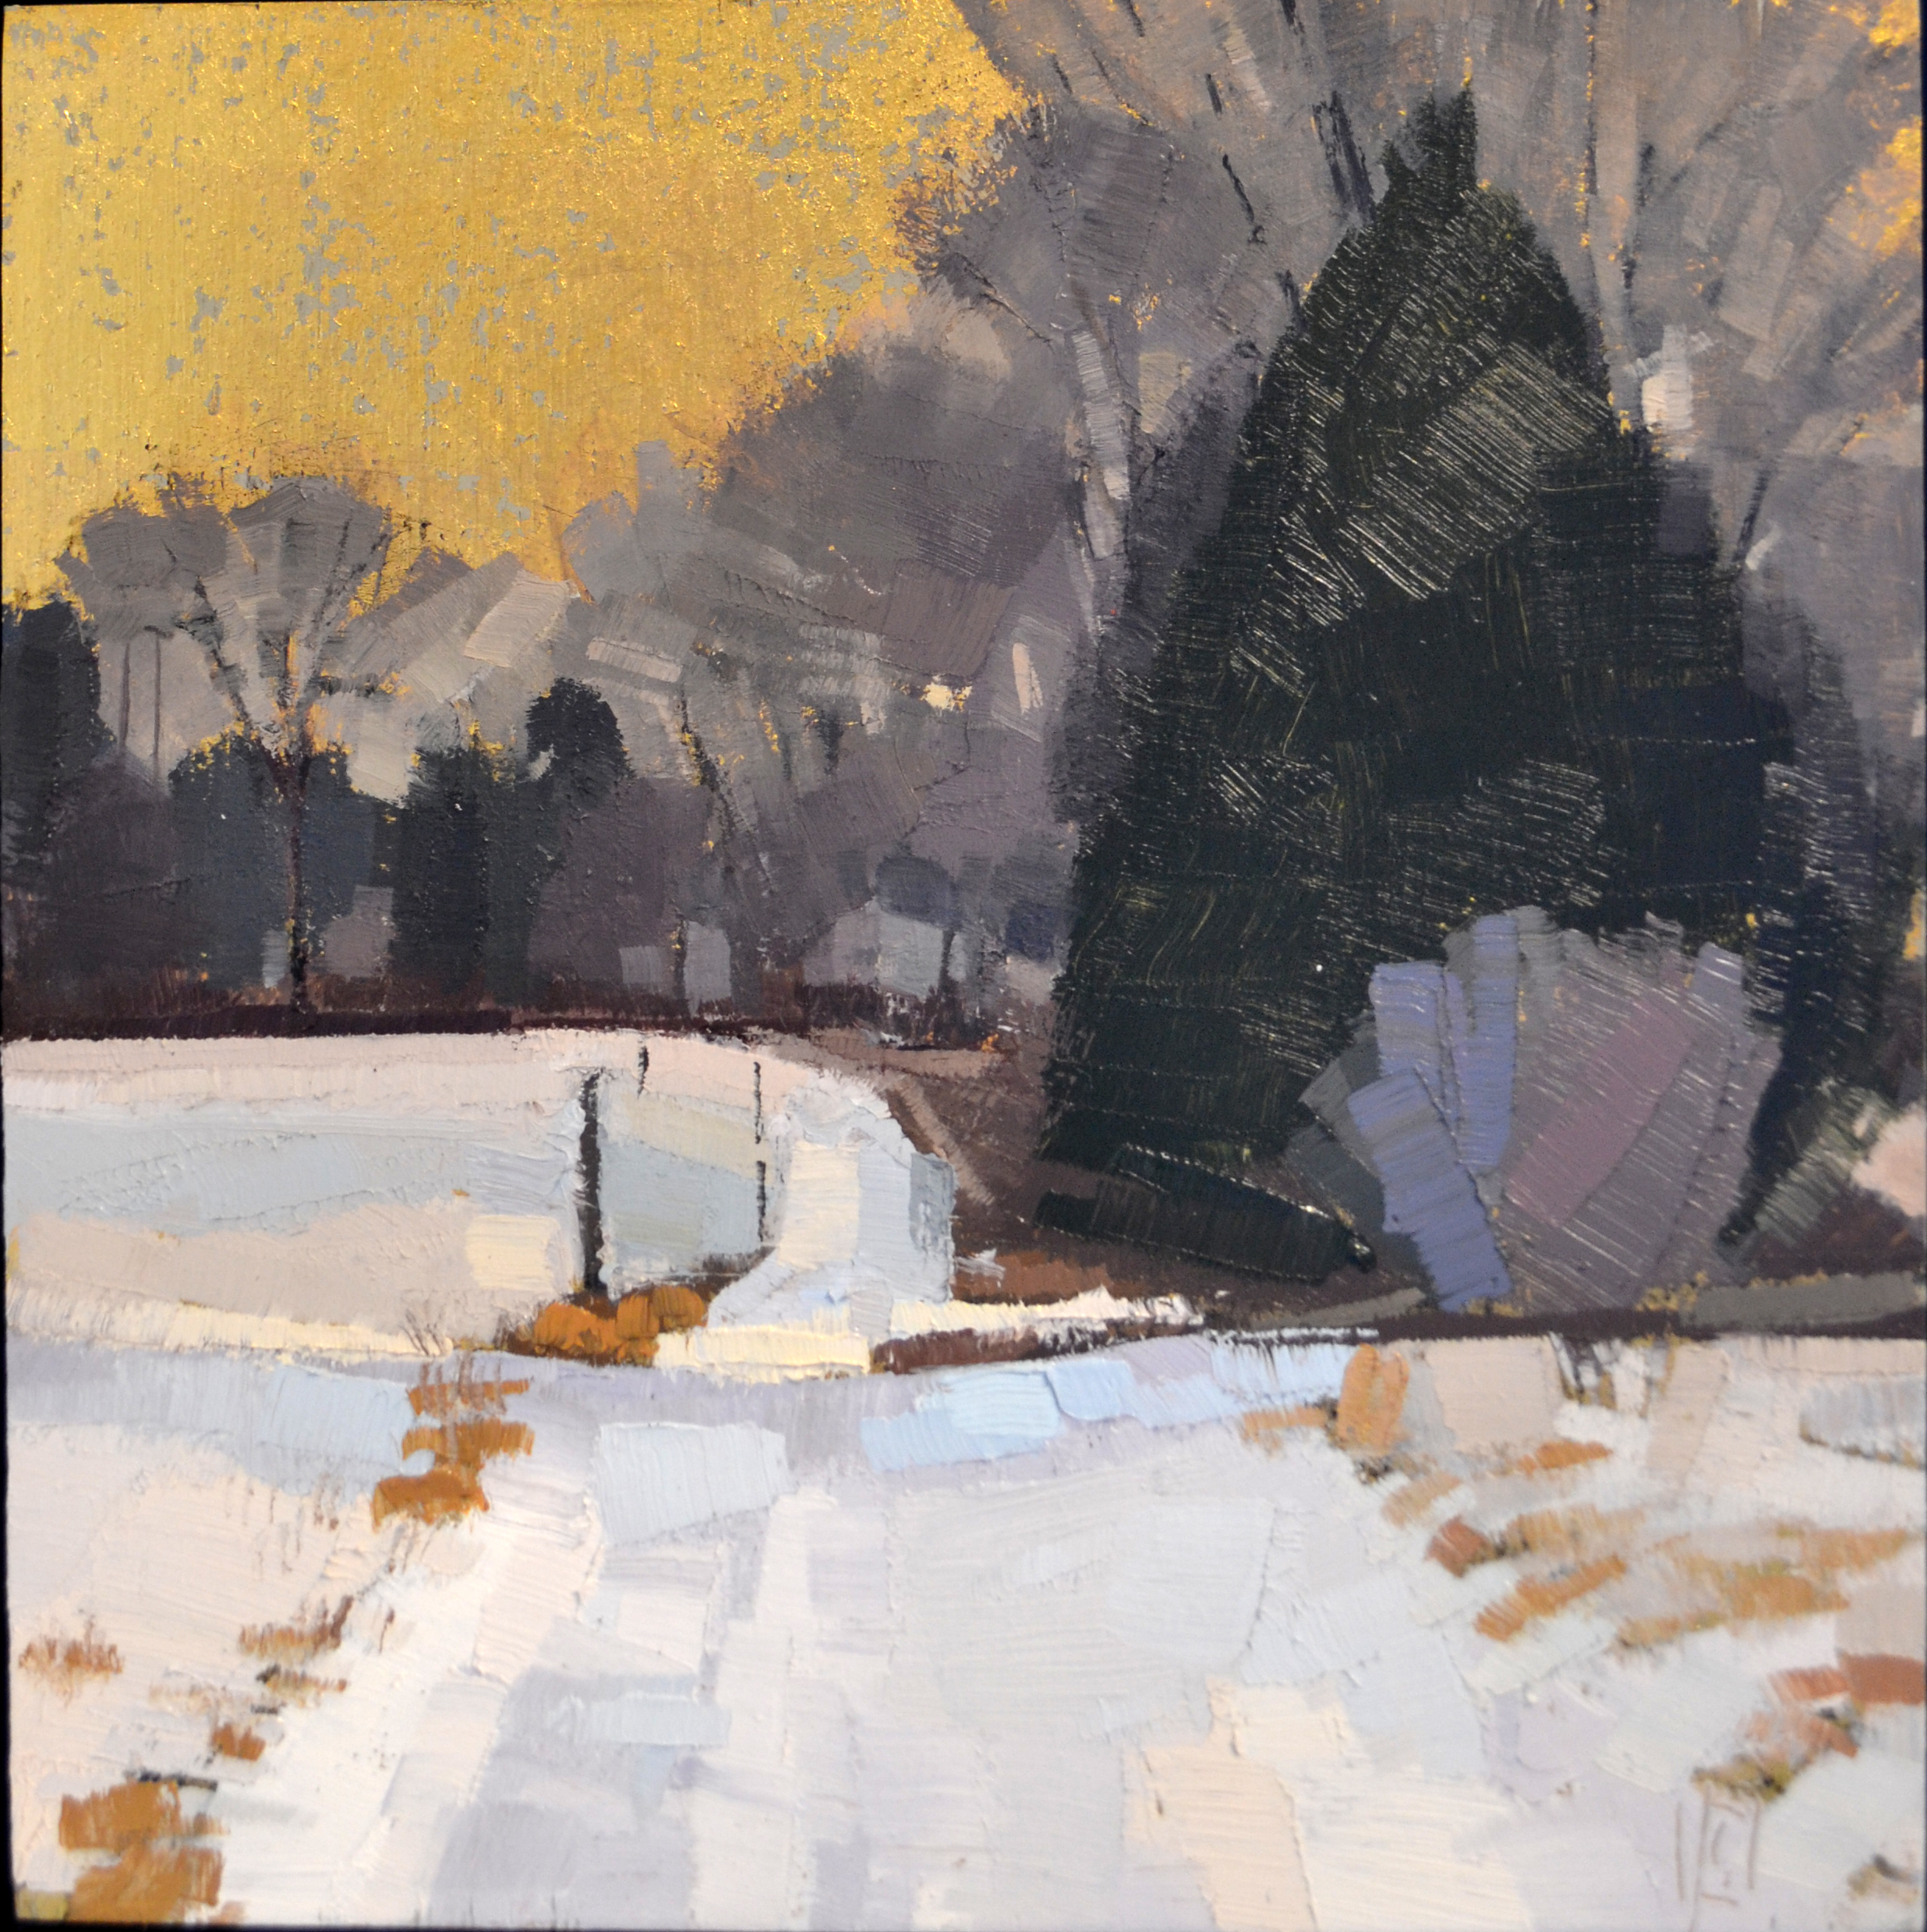   Winterfield  8 x 8 oil and 23K gold on aluminum  sold 